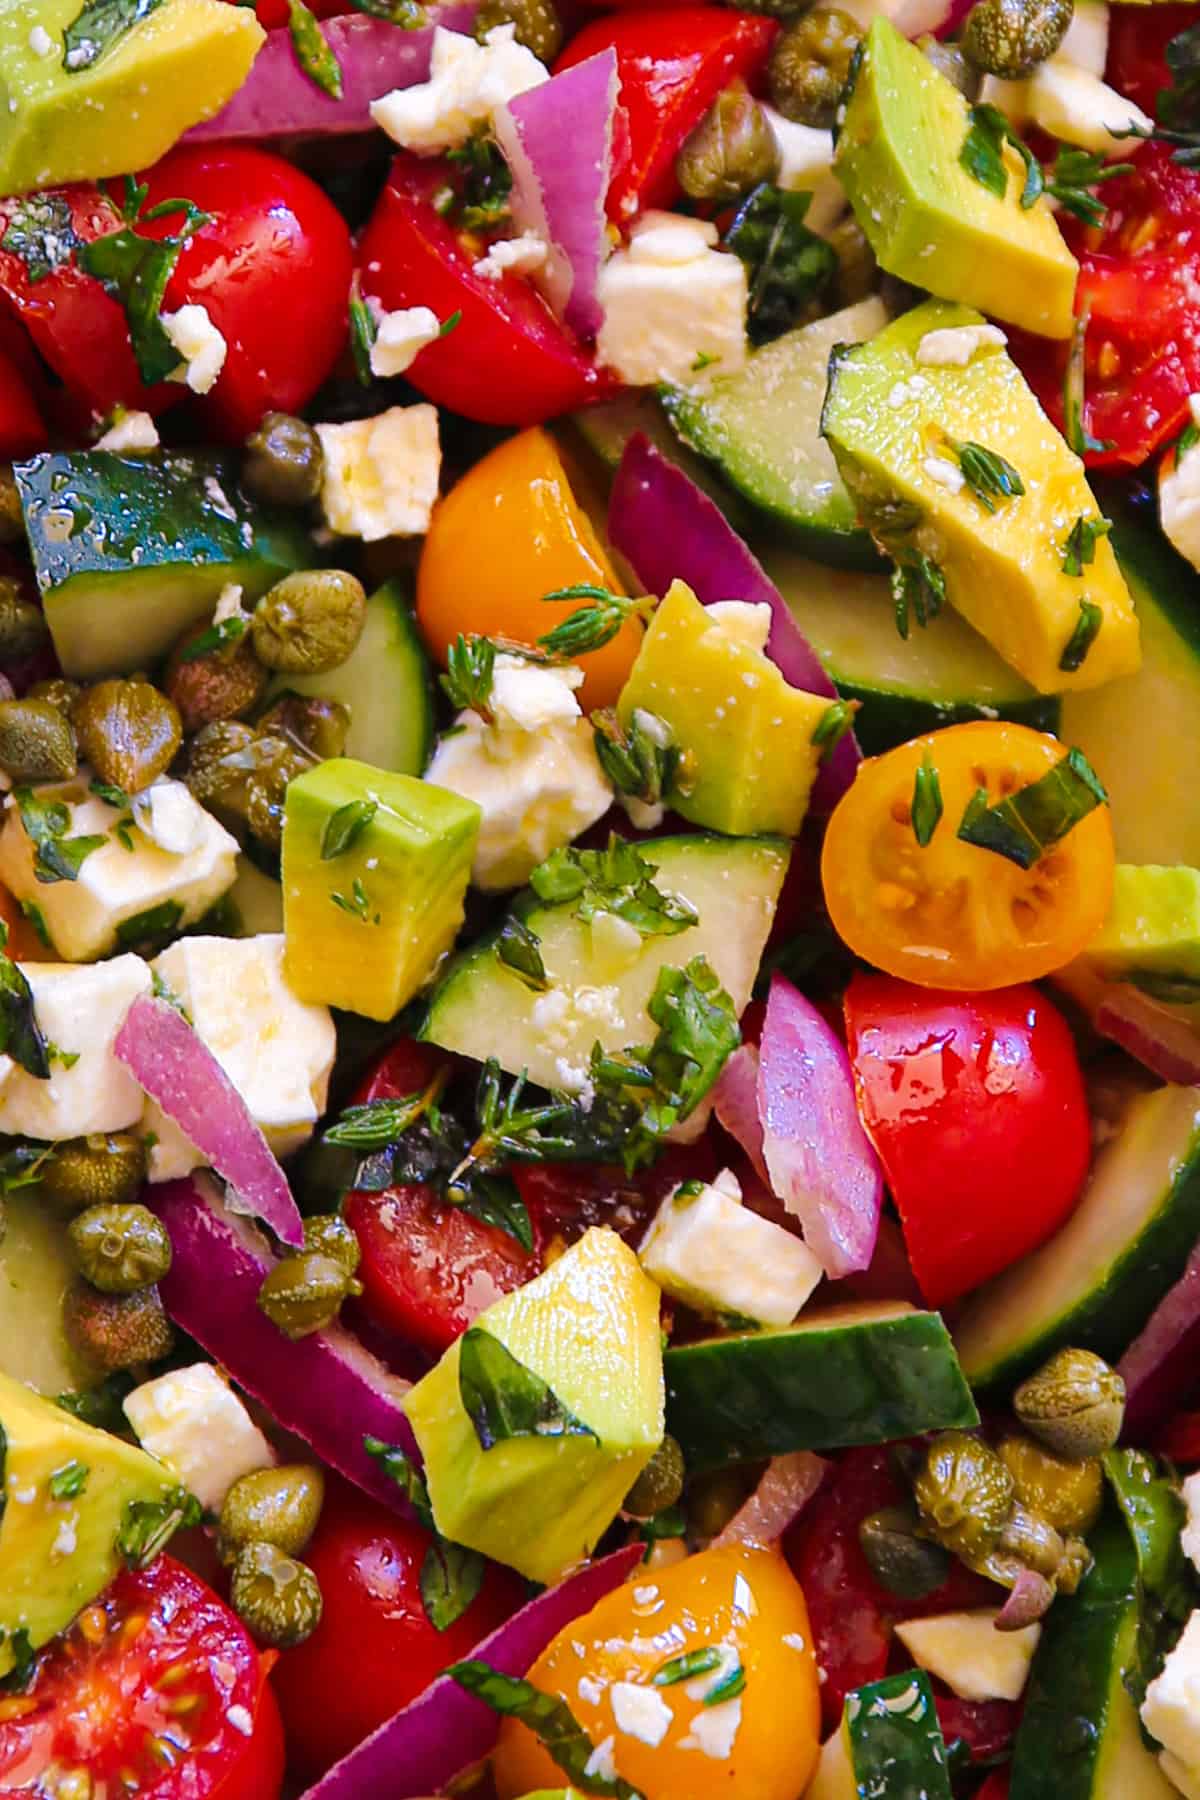 Greek Salad with tomatoes, cucumber, red onions, avocado, capers, and feta cheese - close-up photo.